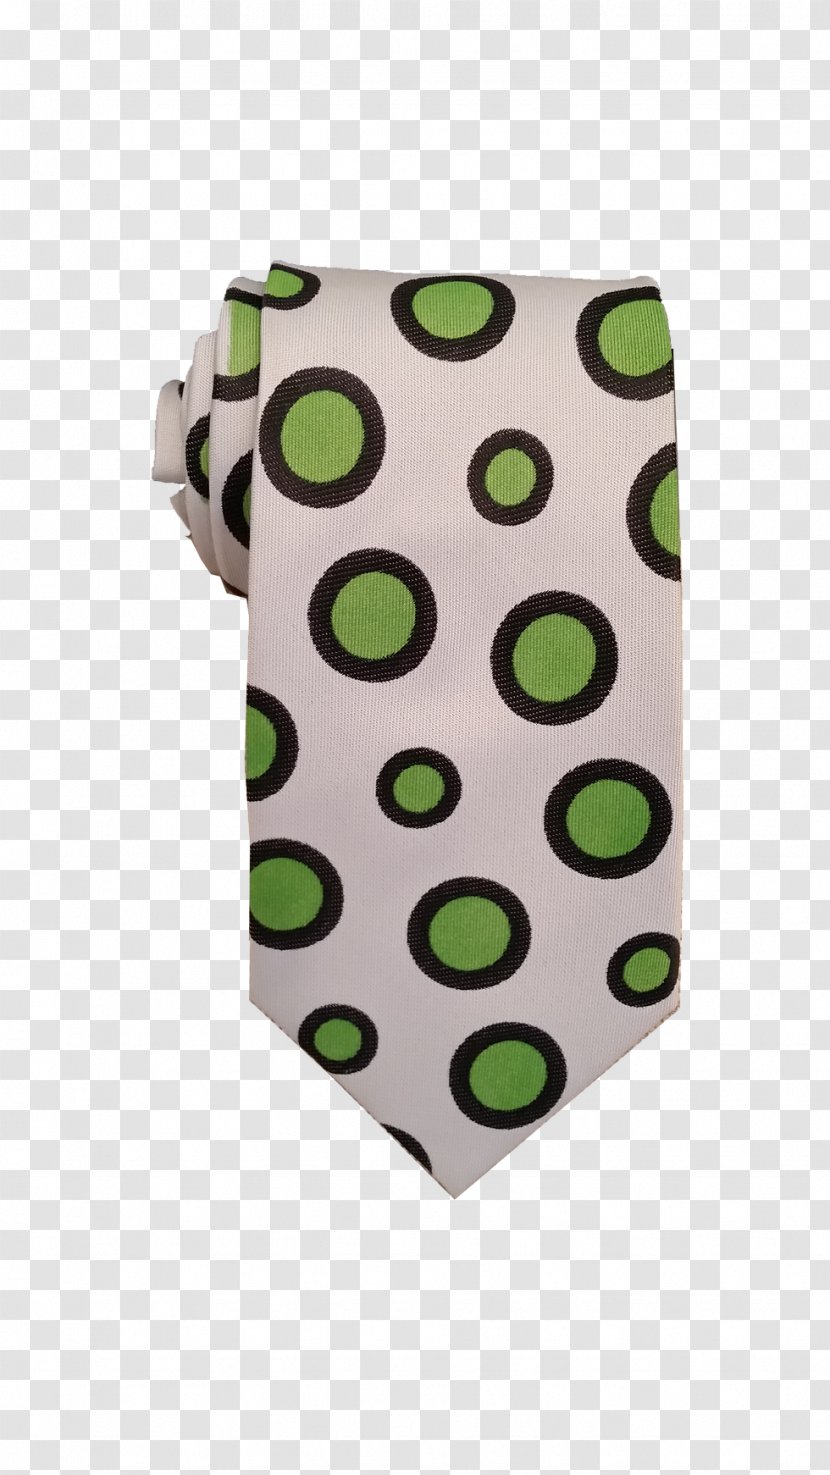 Polka Dot Green - White And Transparent PNG